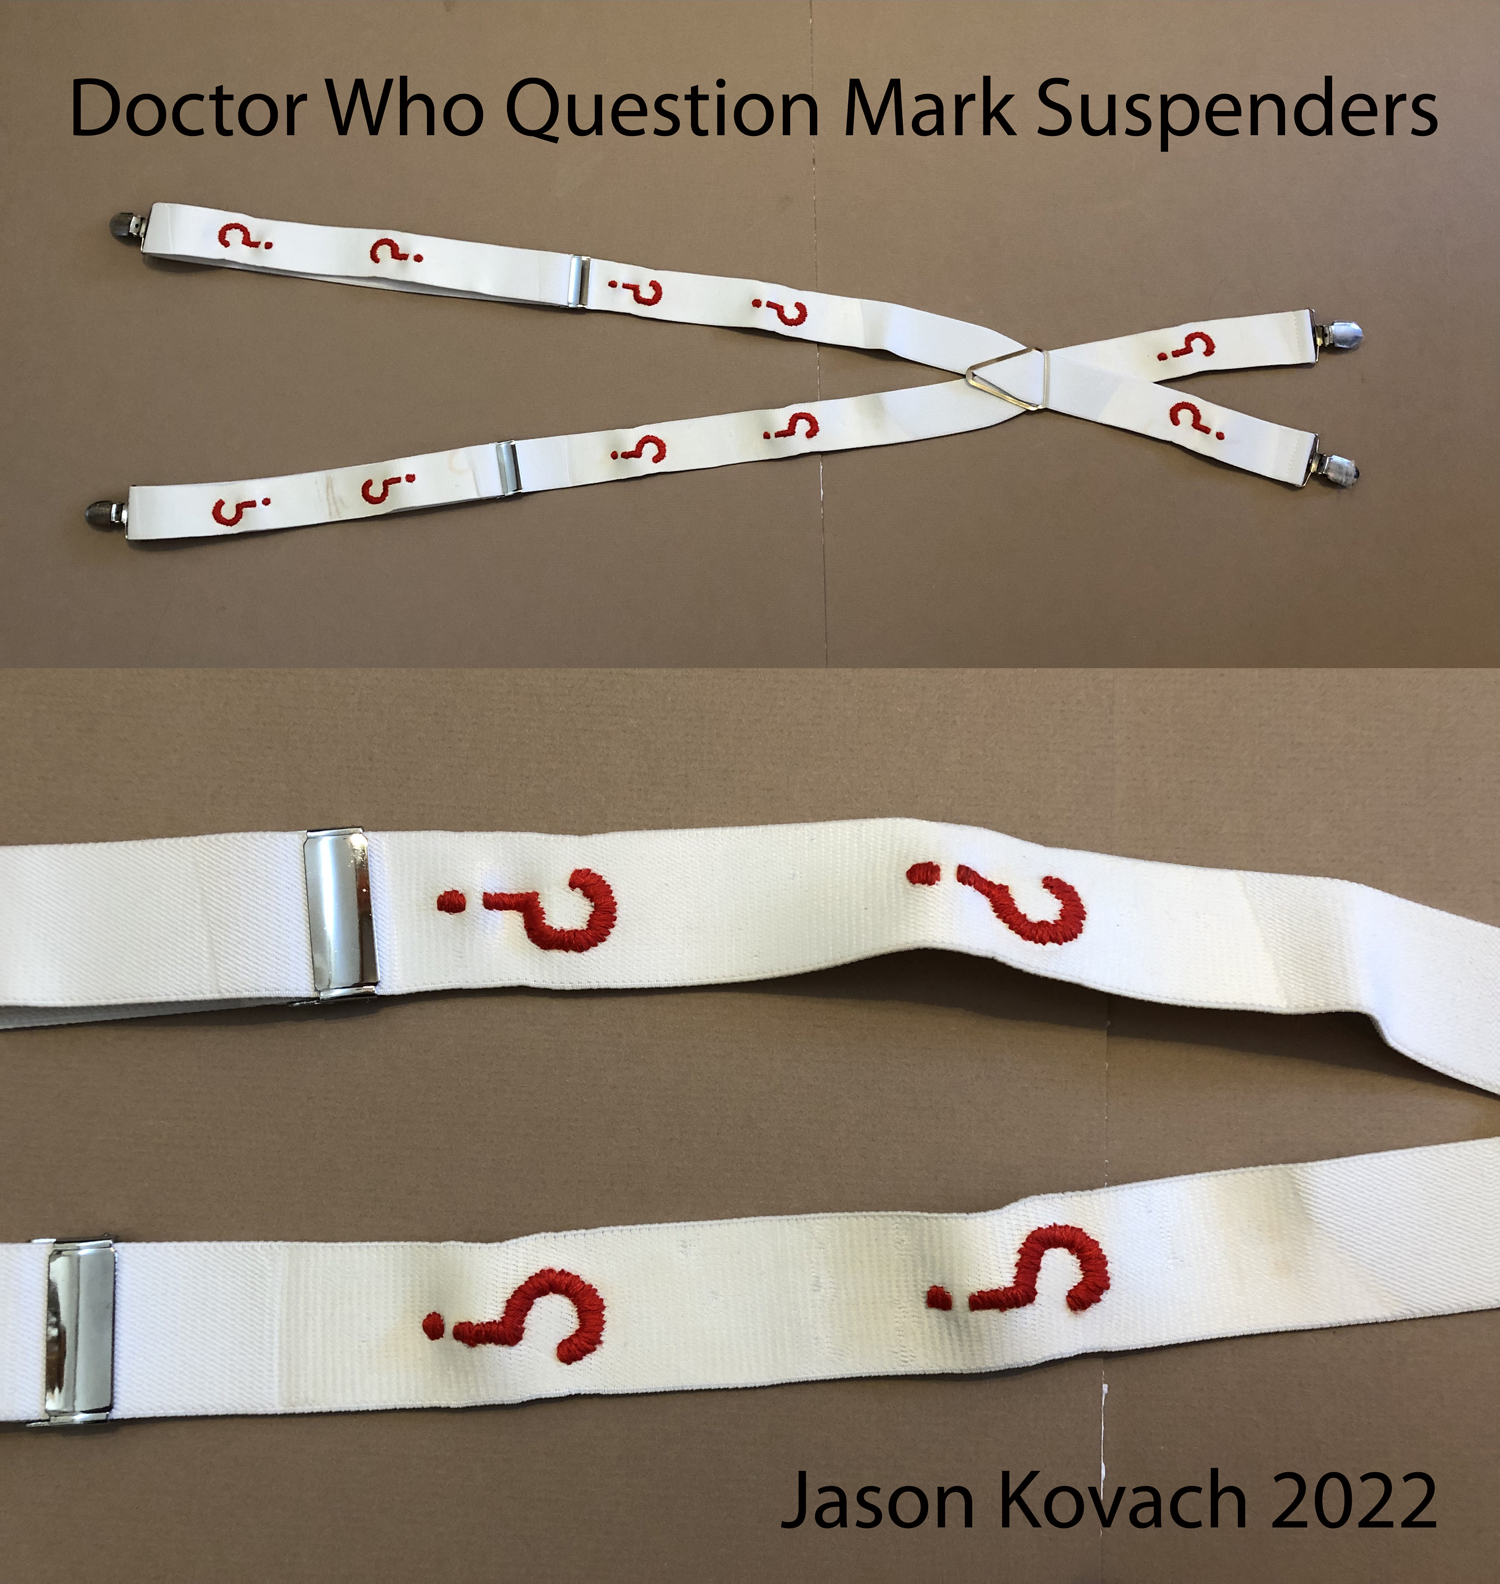 Doctor Who Question Mark Suspenders Post.jpg